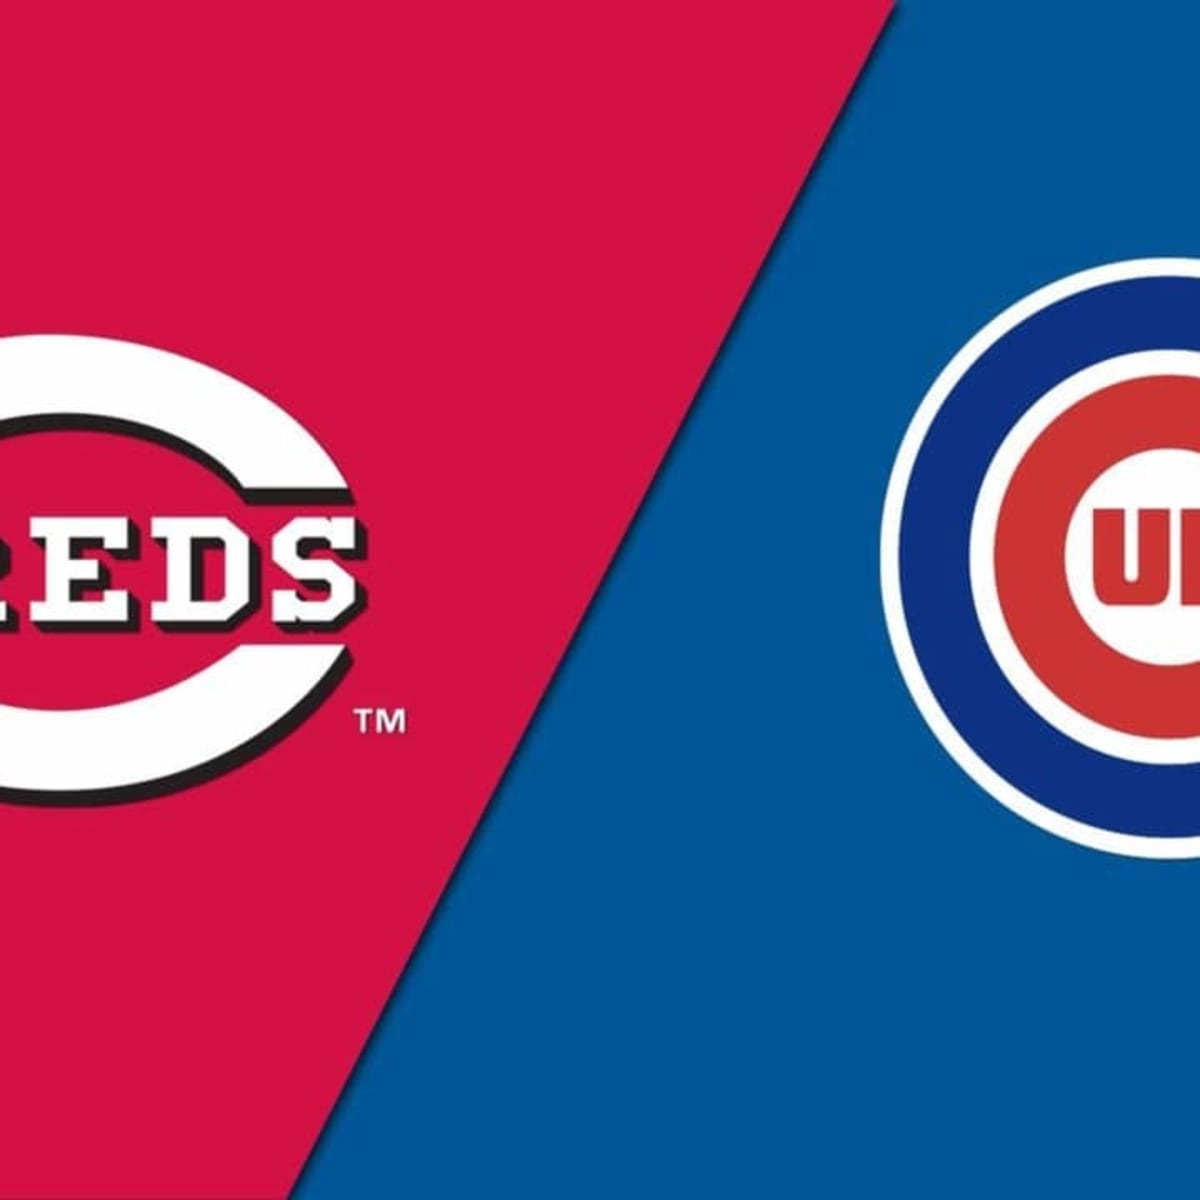 Schwindel's grand slam lifts Cubs over Pirates 11-8